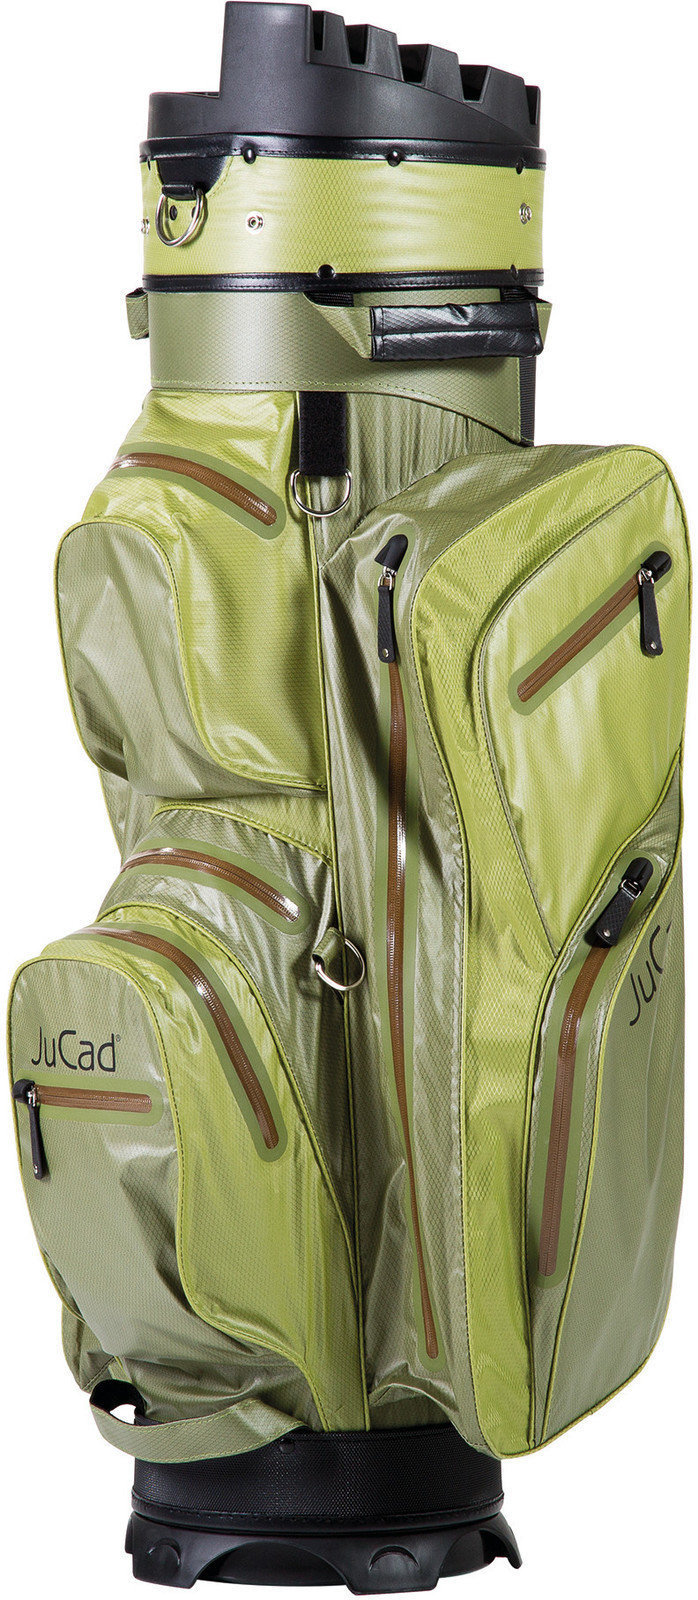 Golfbag Jucad Manager Dry Olive Green Golfbag